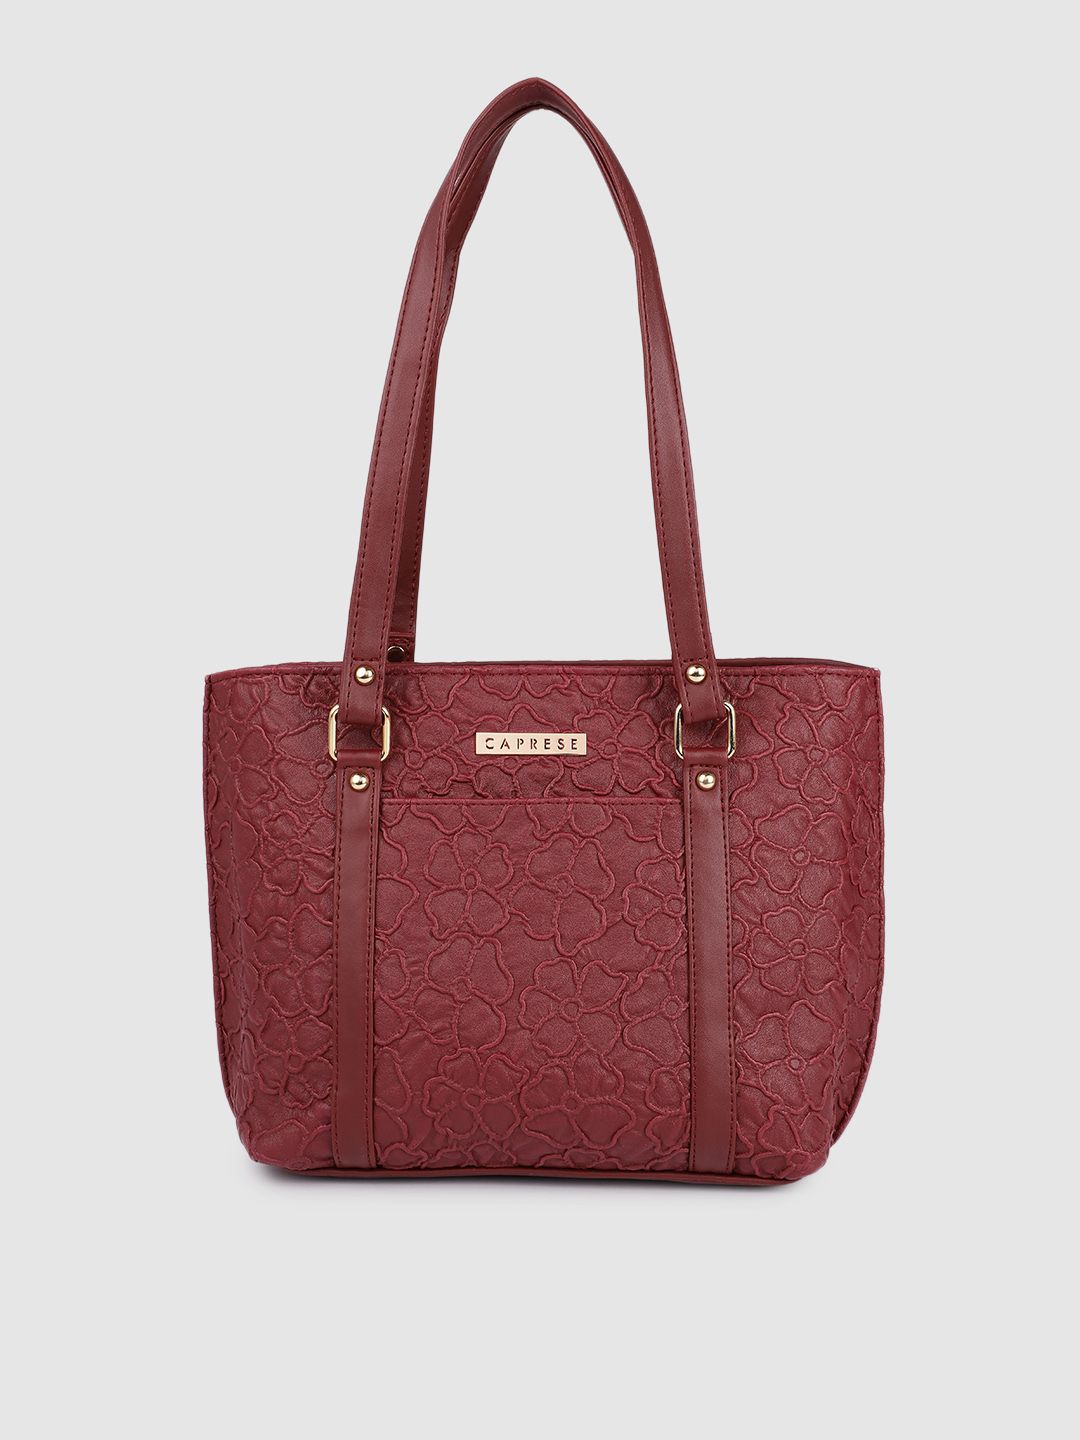 Caprese Burgundy Floral Textured Leather Structured Shoulder Bag Price in India